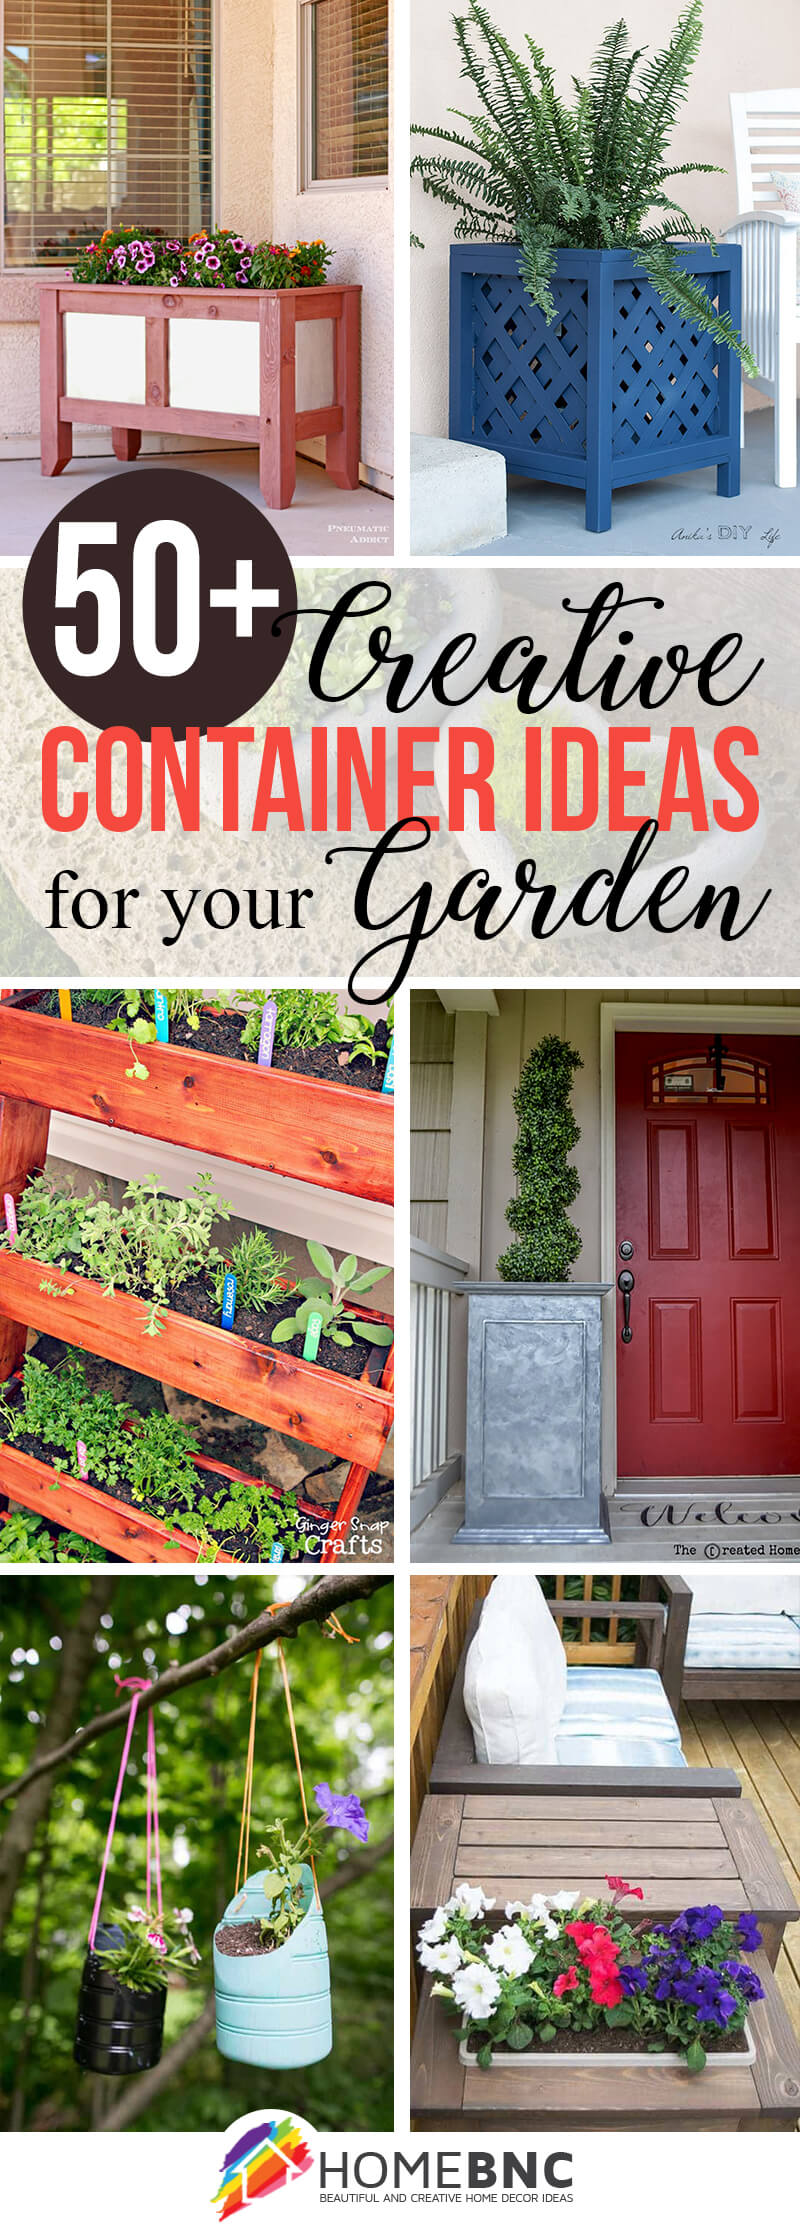  Best Creative Garden Container Ideas And Designs For 